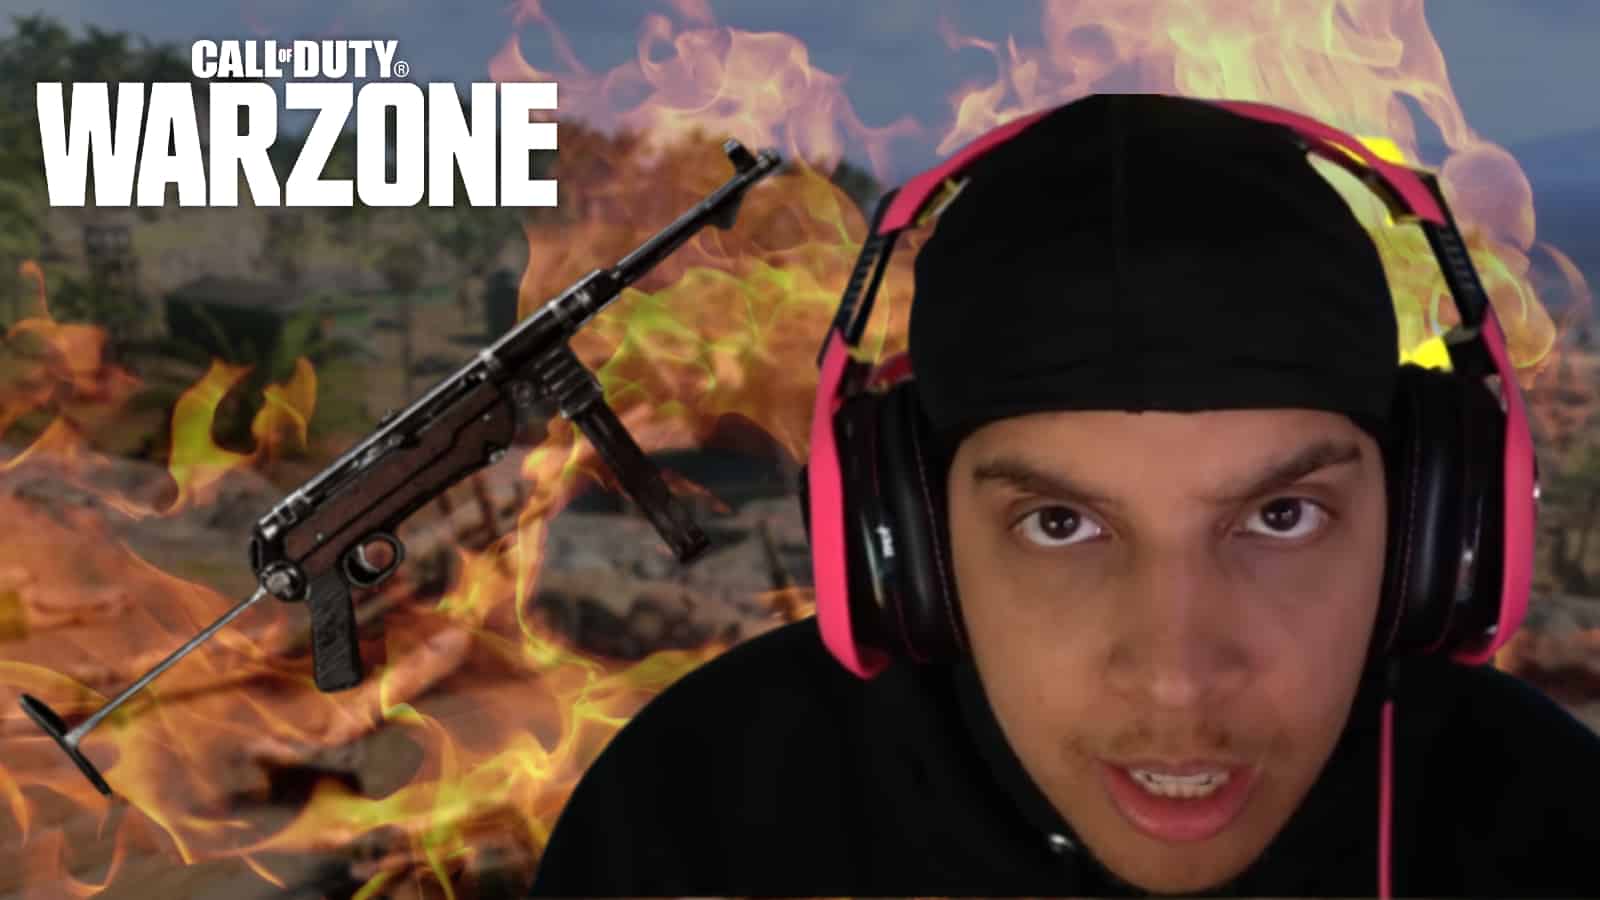 Swagg shows why Warzone fire rounds make MP-40 loadout "OP"